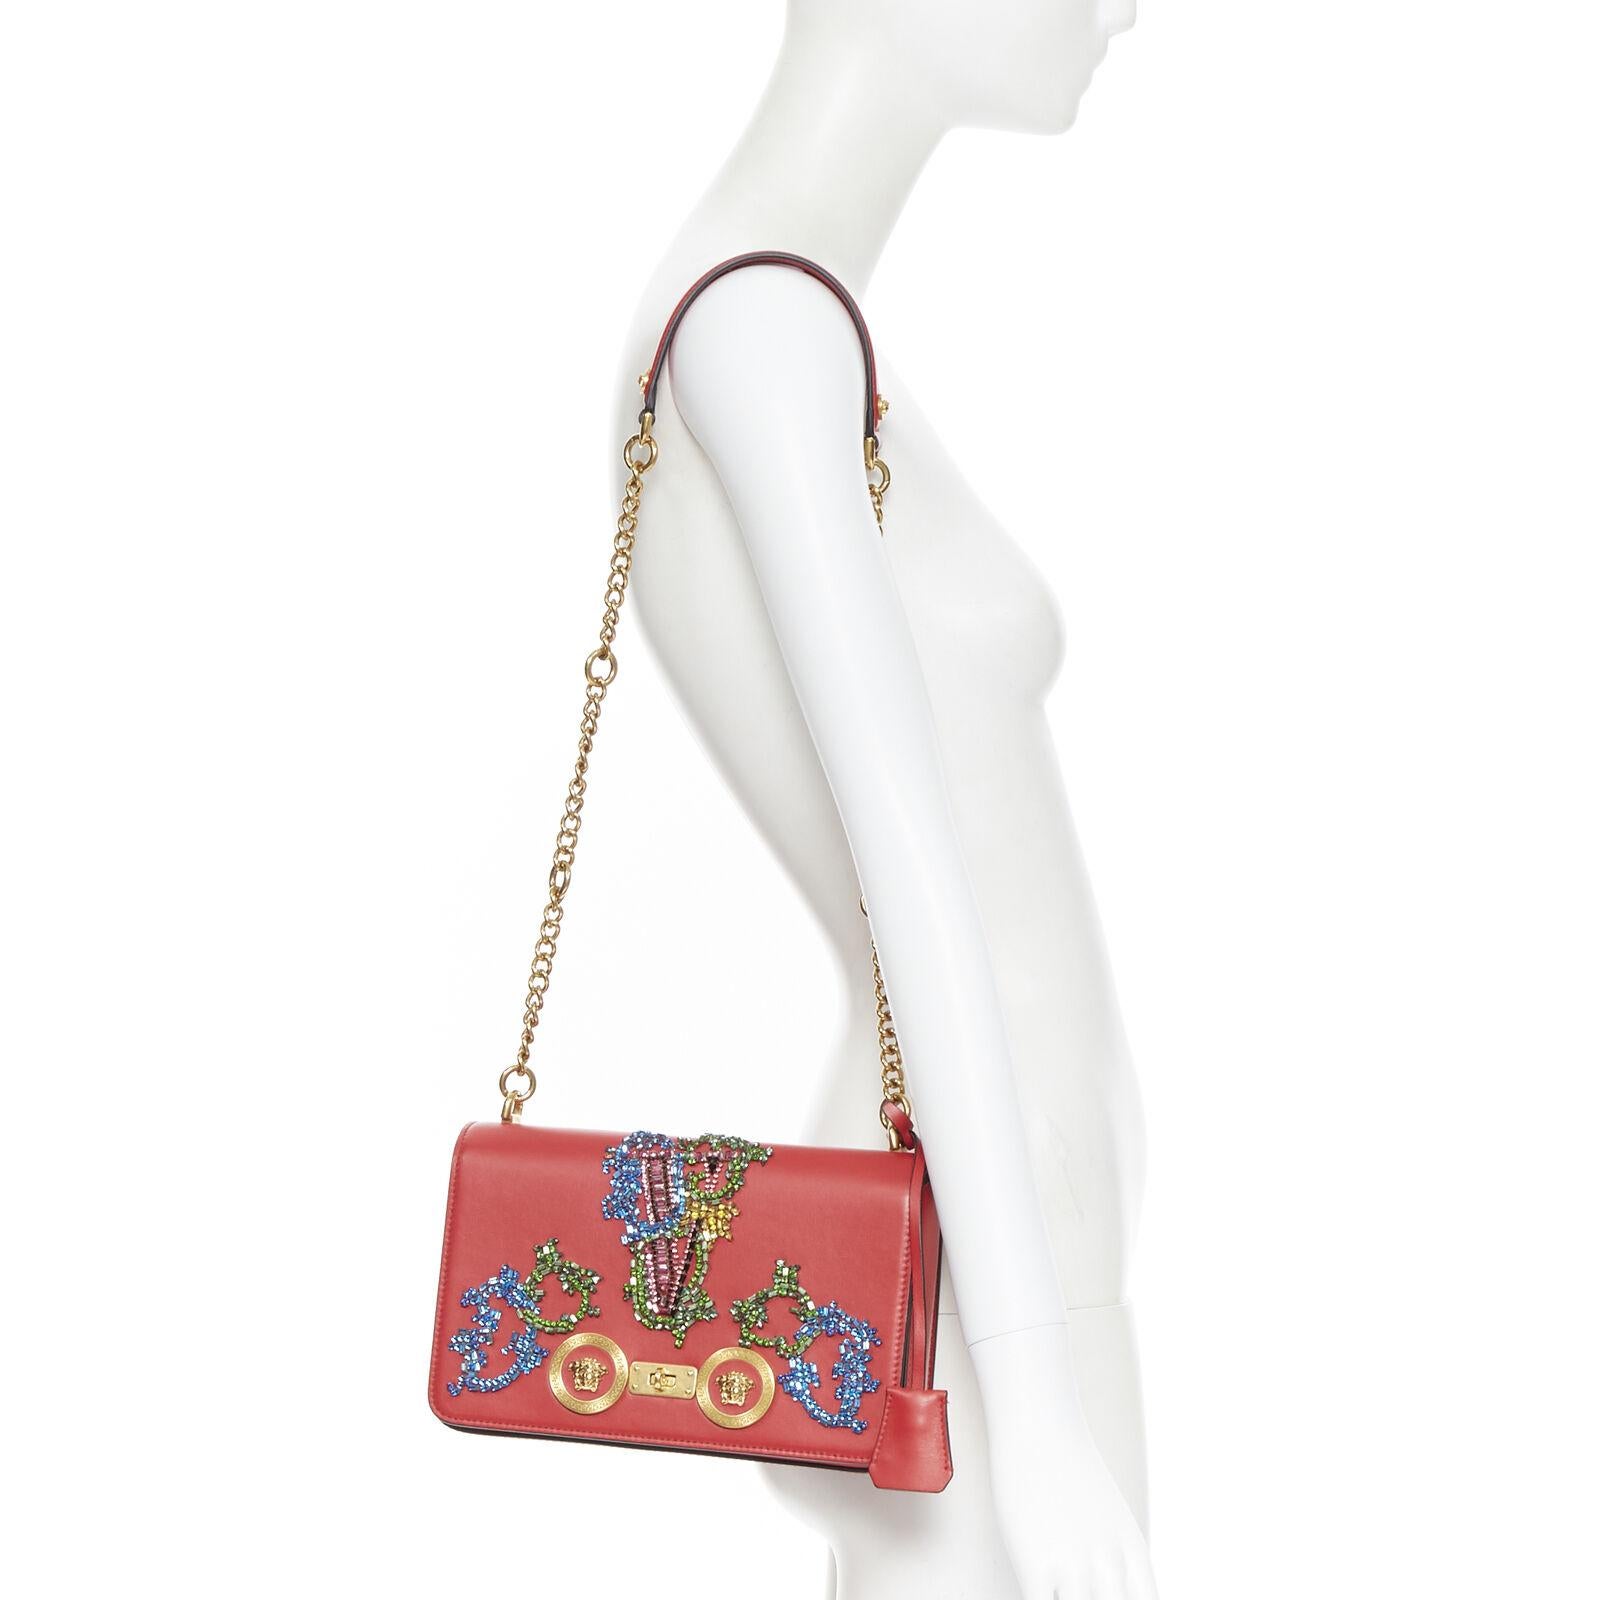 VERSACE 
Medium Icon red baroque Virtus V crystal embellished Medusa bag
Brand: Versace
Designer: Donatella Versace
Collection: 2019
Model Name / Style: Medium Icon
Material: Leather
Color: Red
Pattern: Abstract
Closure: Turnlock
Lining material: